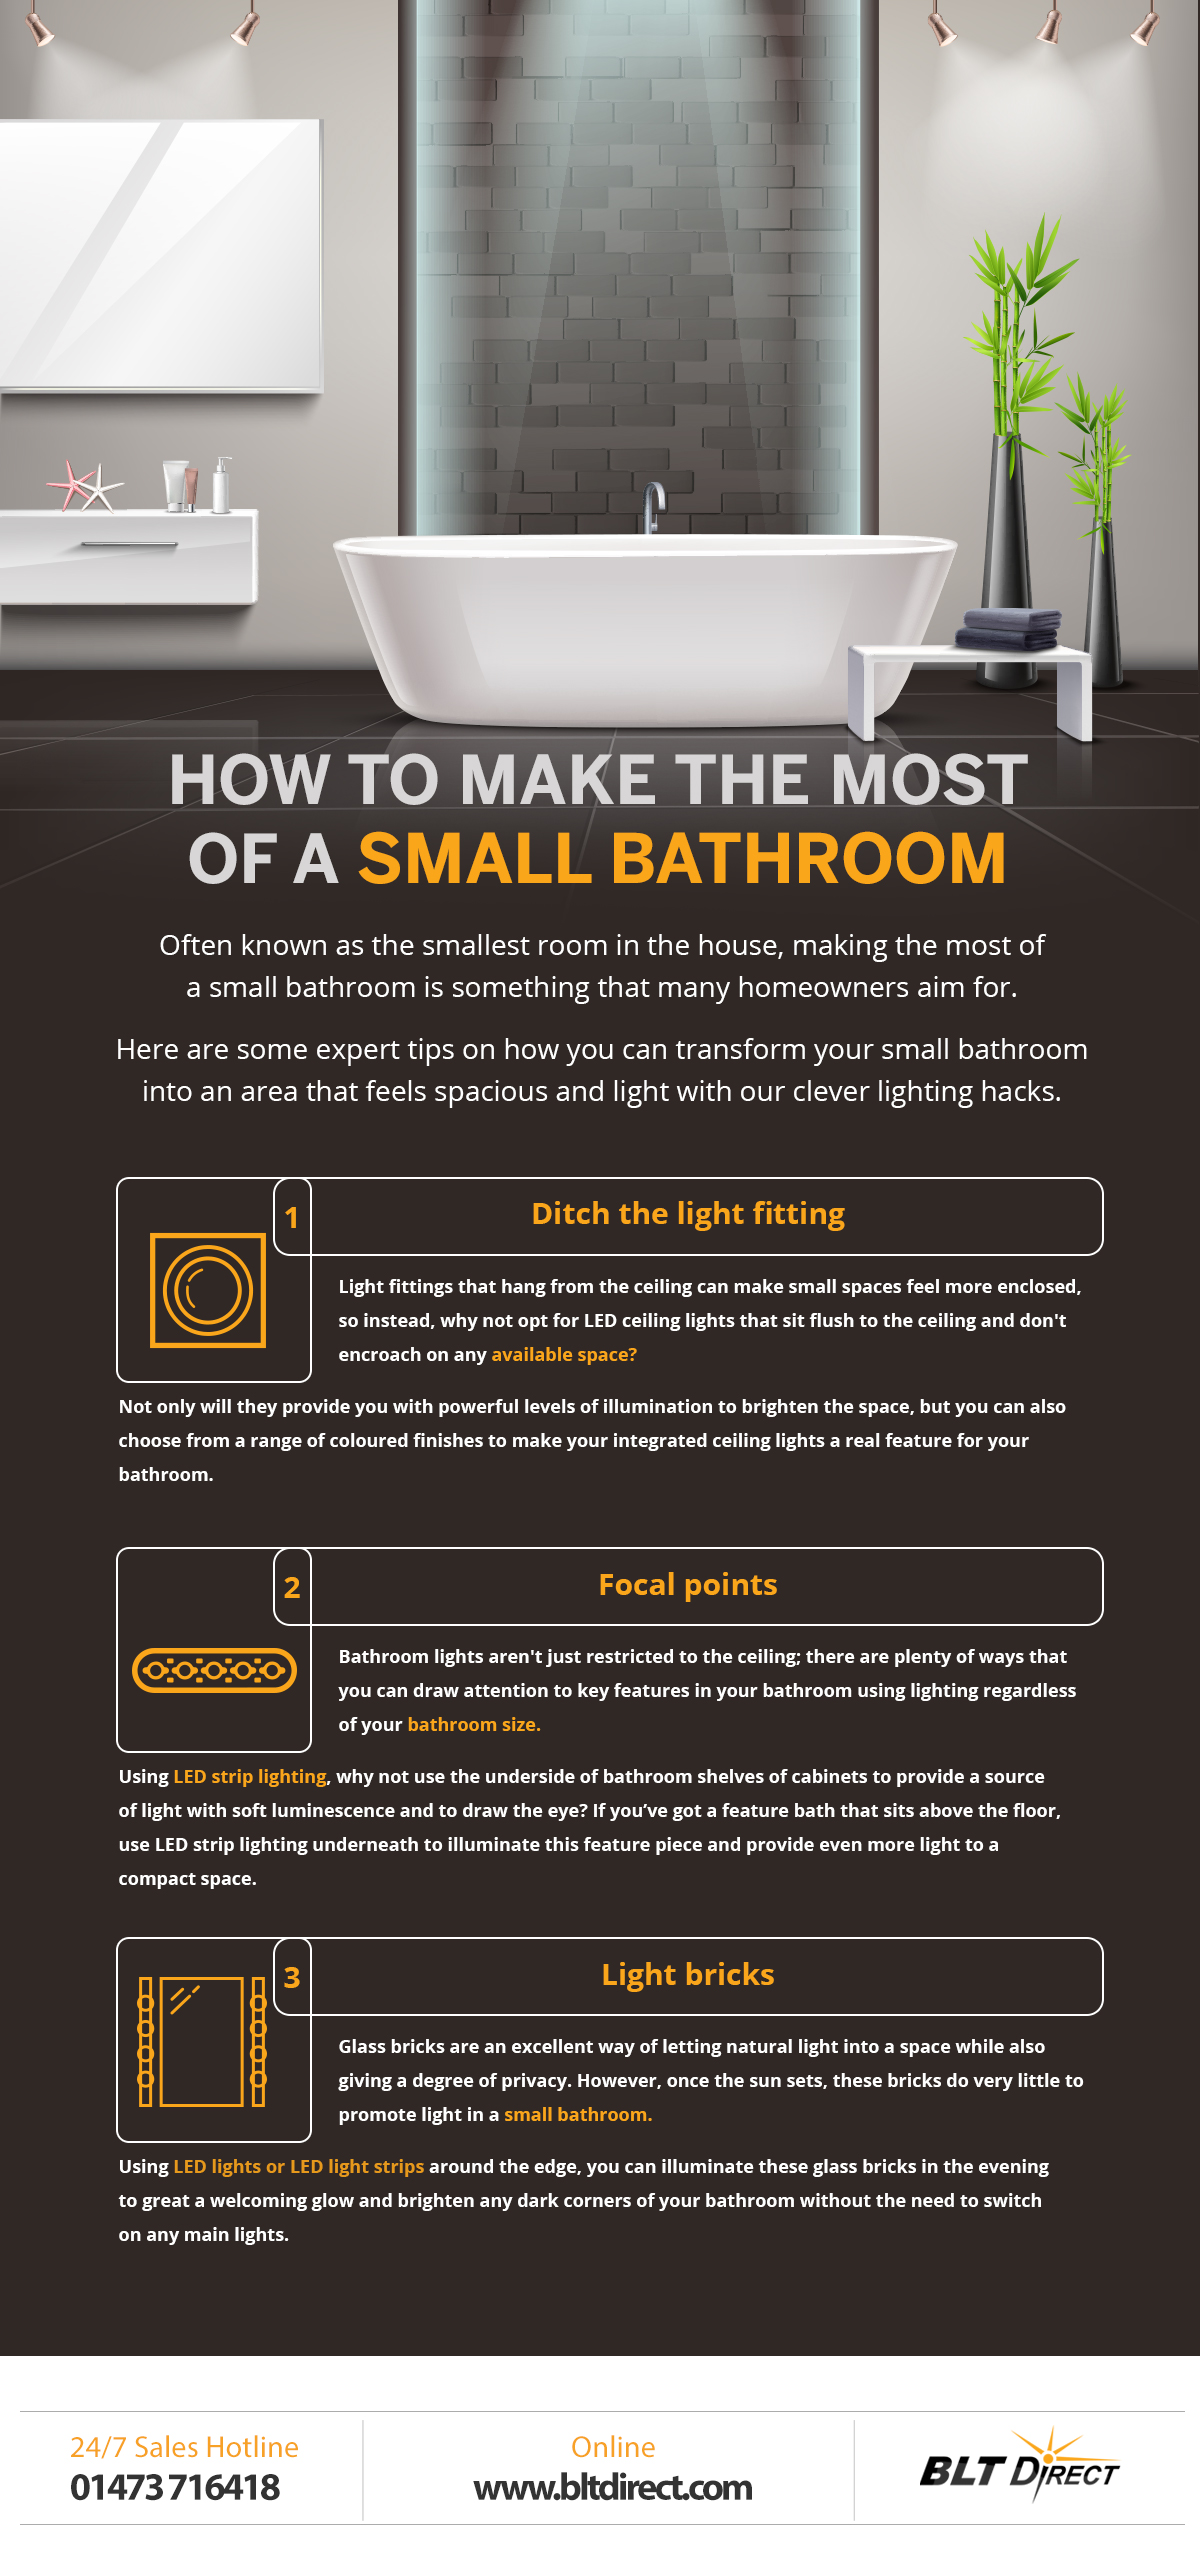 How_to_make_the_most_of_a_small_bathroom_infographic_ver01-1